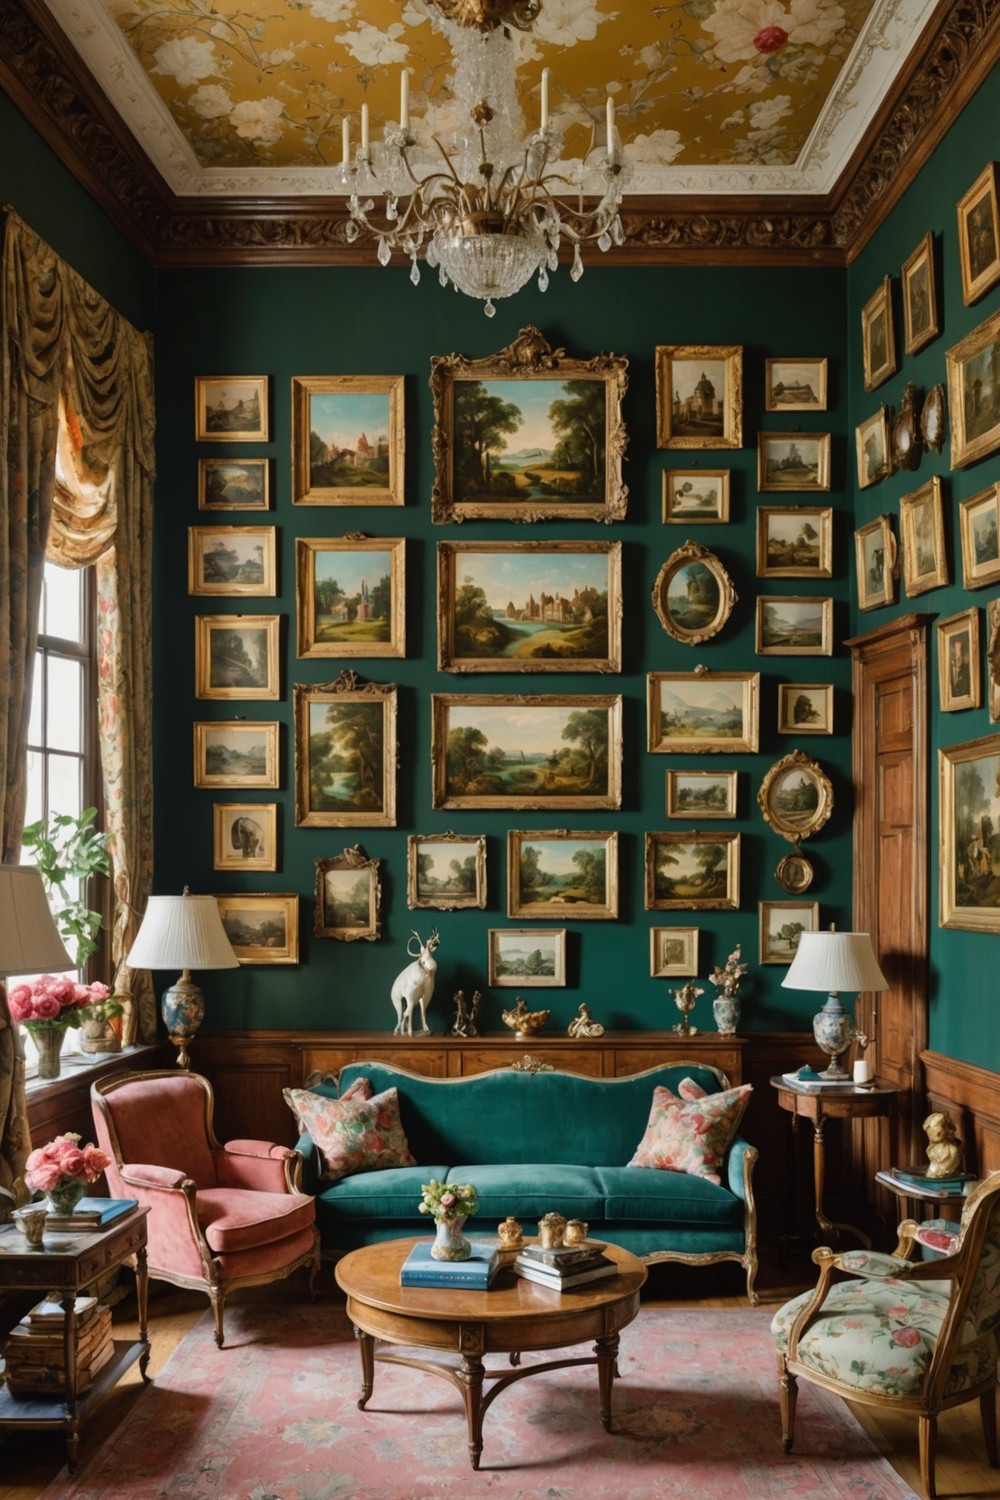 The Art of the Gallery Wall: A Bridgerton-Inspired Display